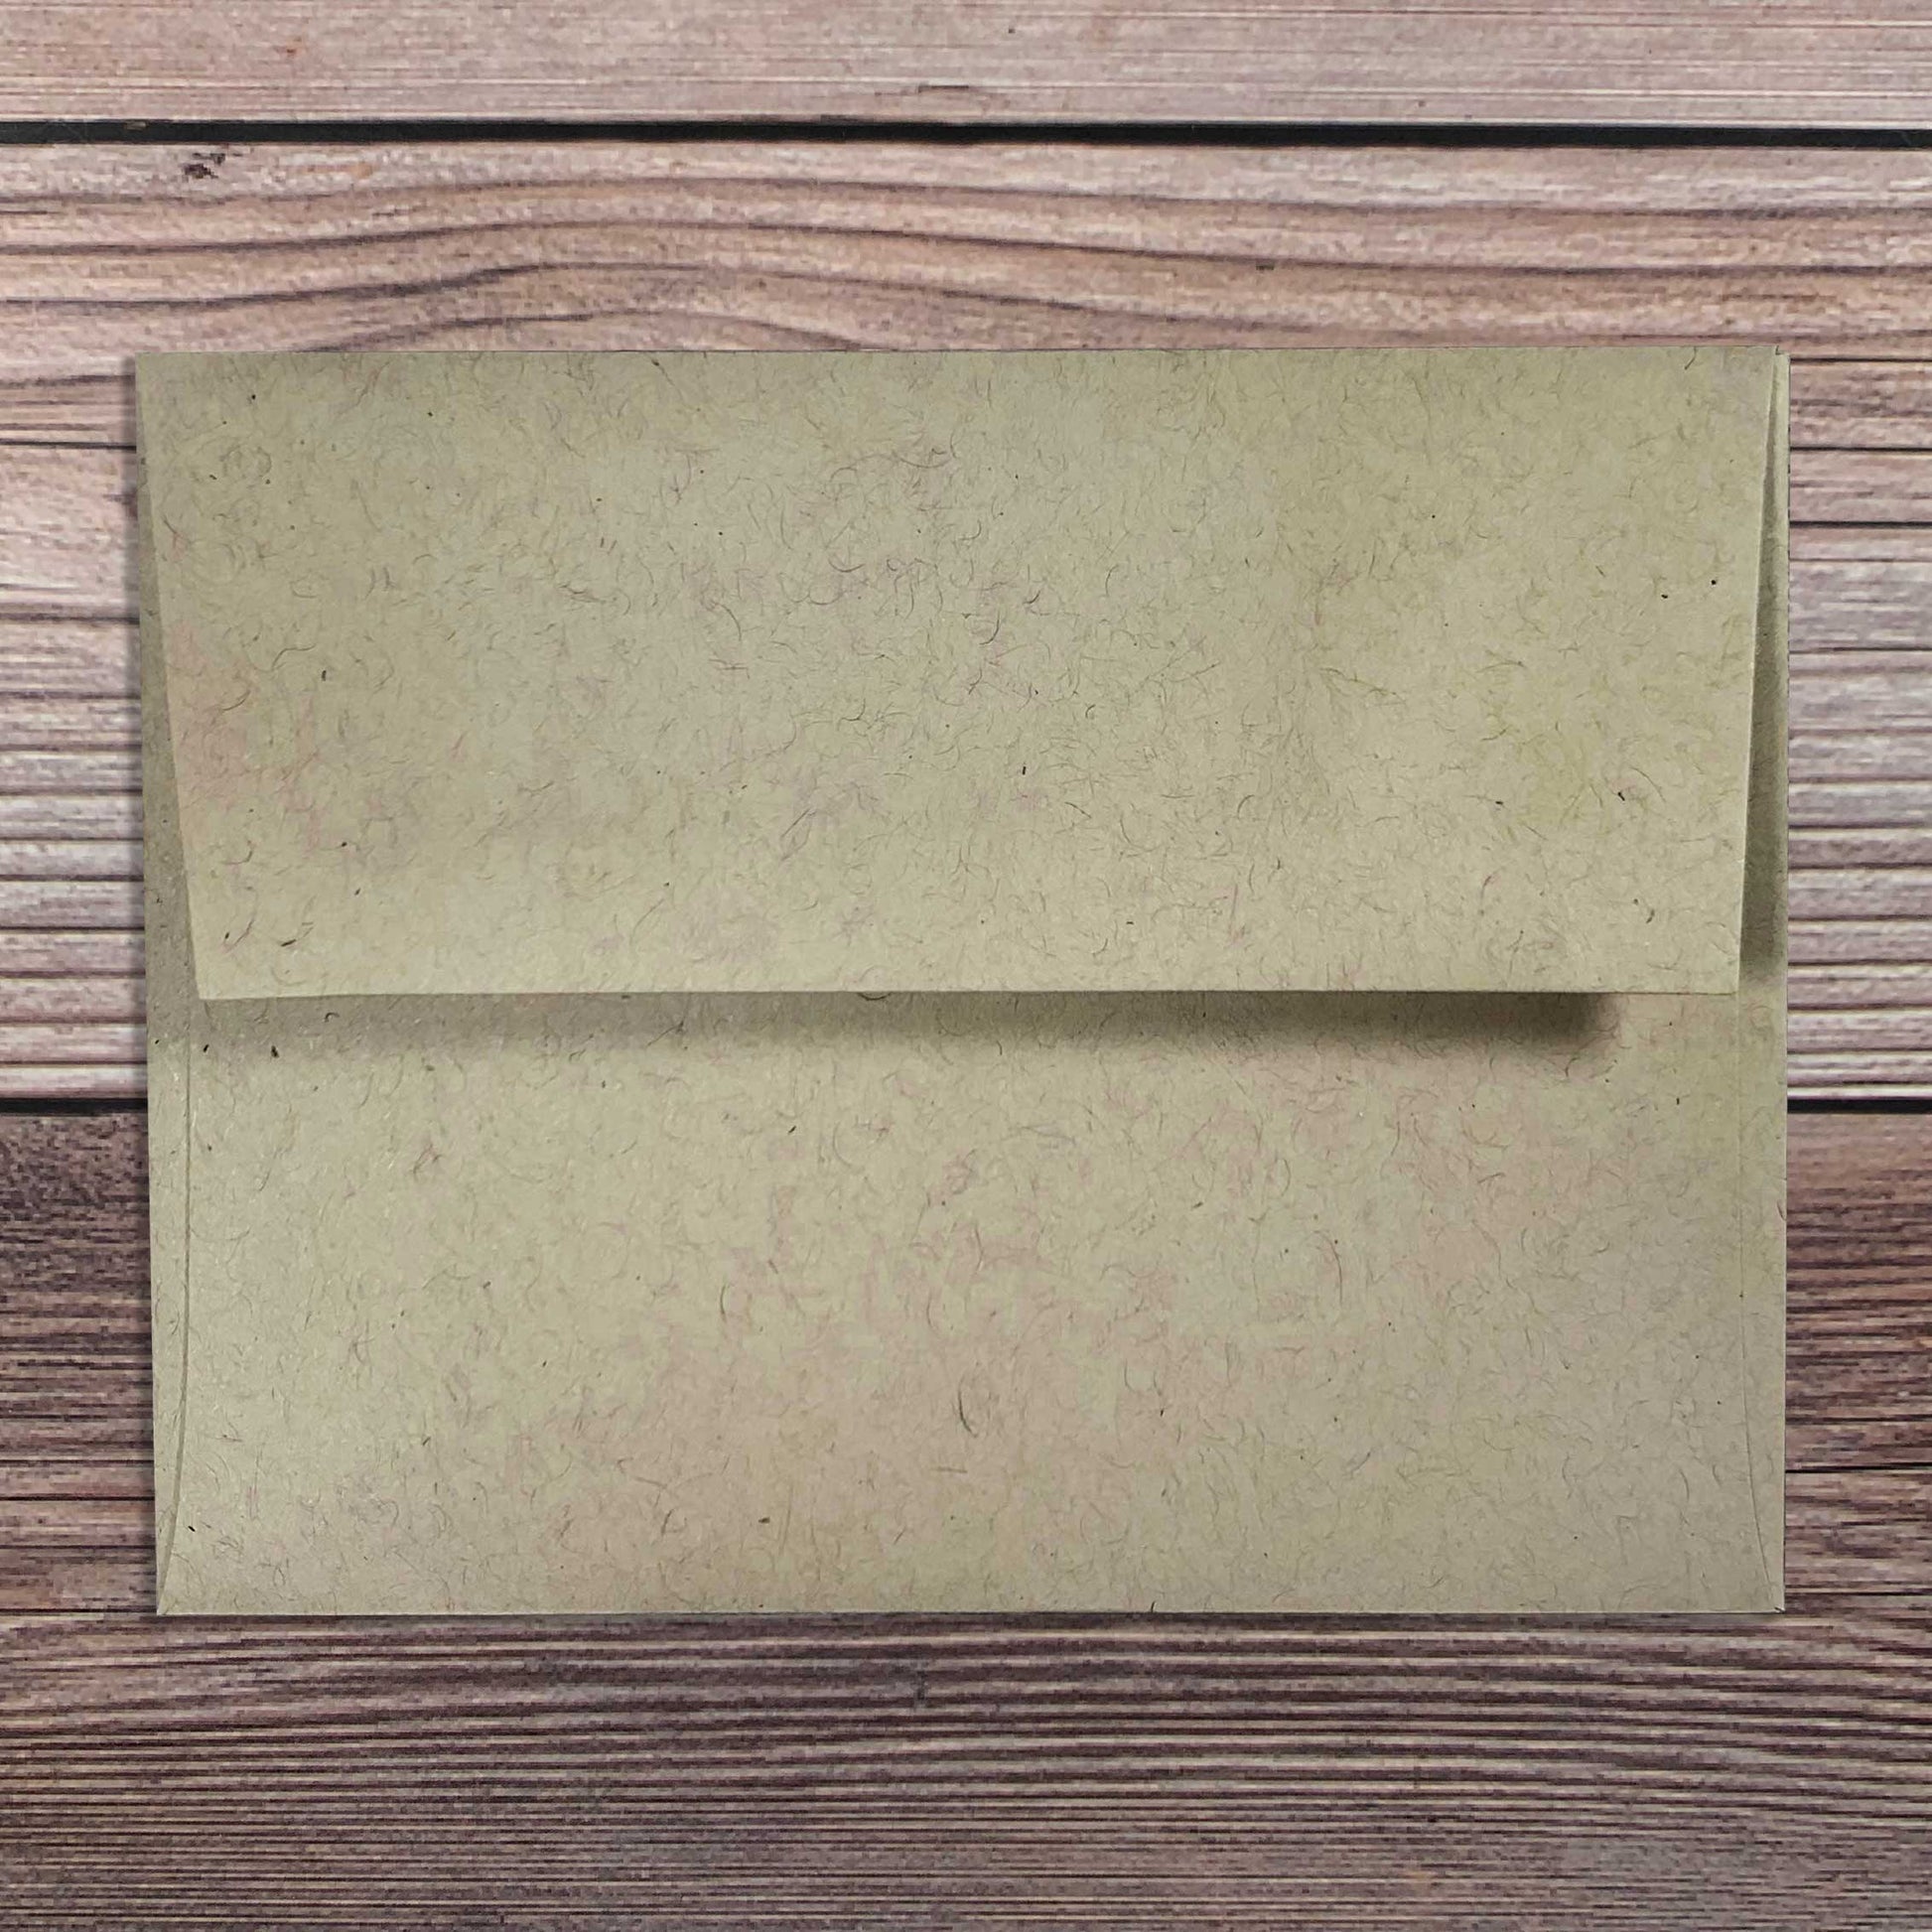 Greeting Card envelope, kraft color, square flap, included with letterpress baby shower greeting card.